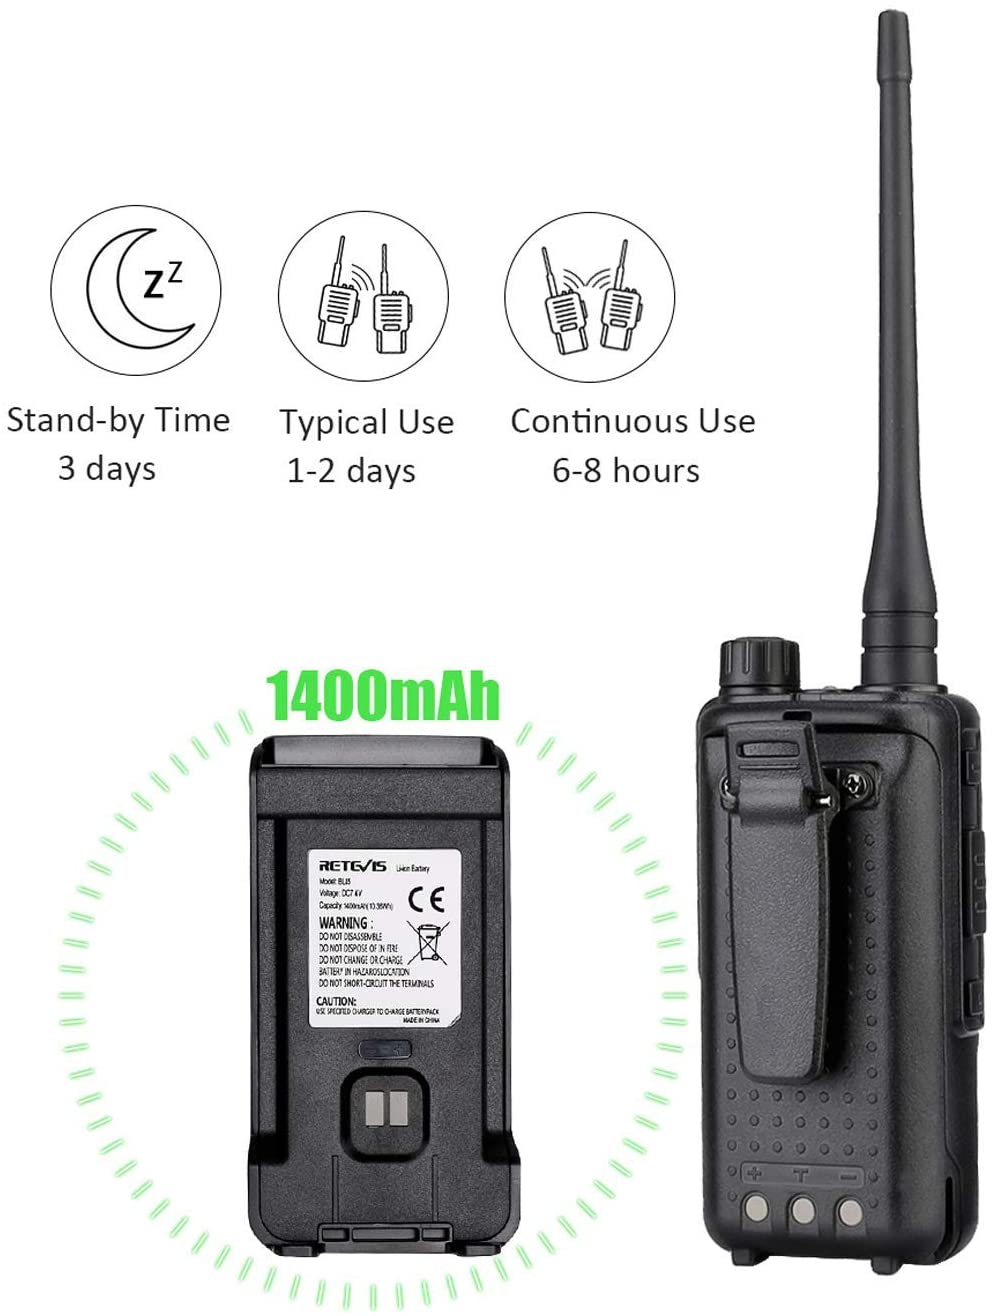 Retevis RT-5R Walkie Talkies Long Range, Dual Band 128CH High Power Handheld Two Way Radios, 1400mAh Rechargeable Way Radios with Shoulder Mic, for - 5